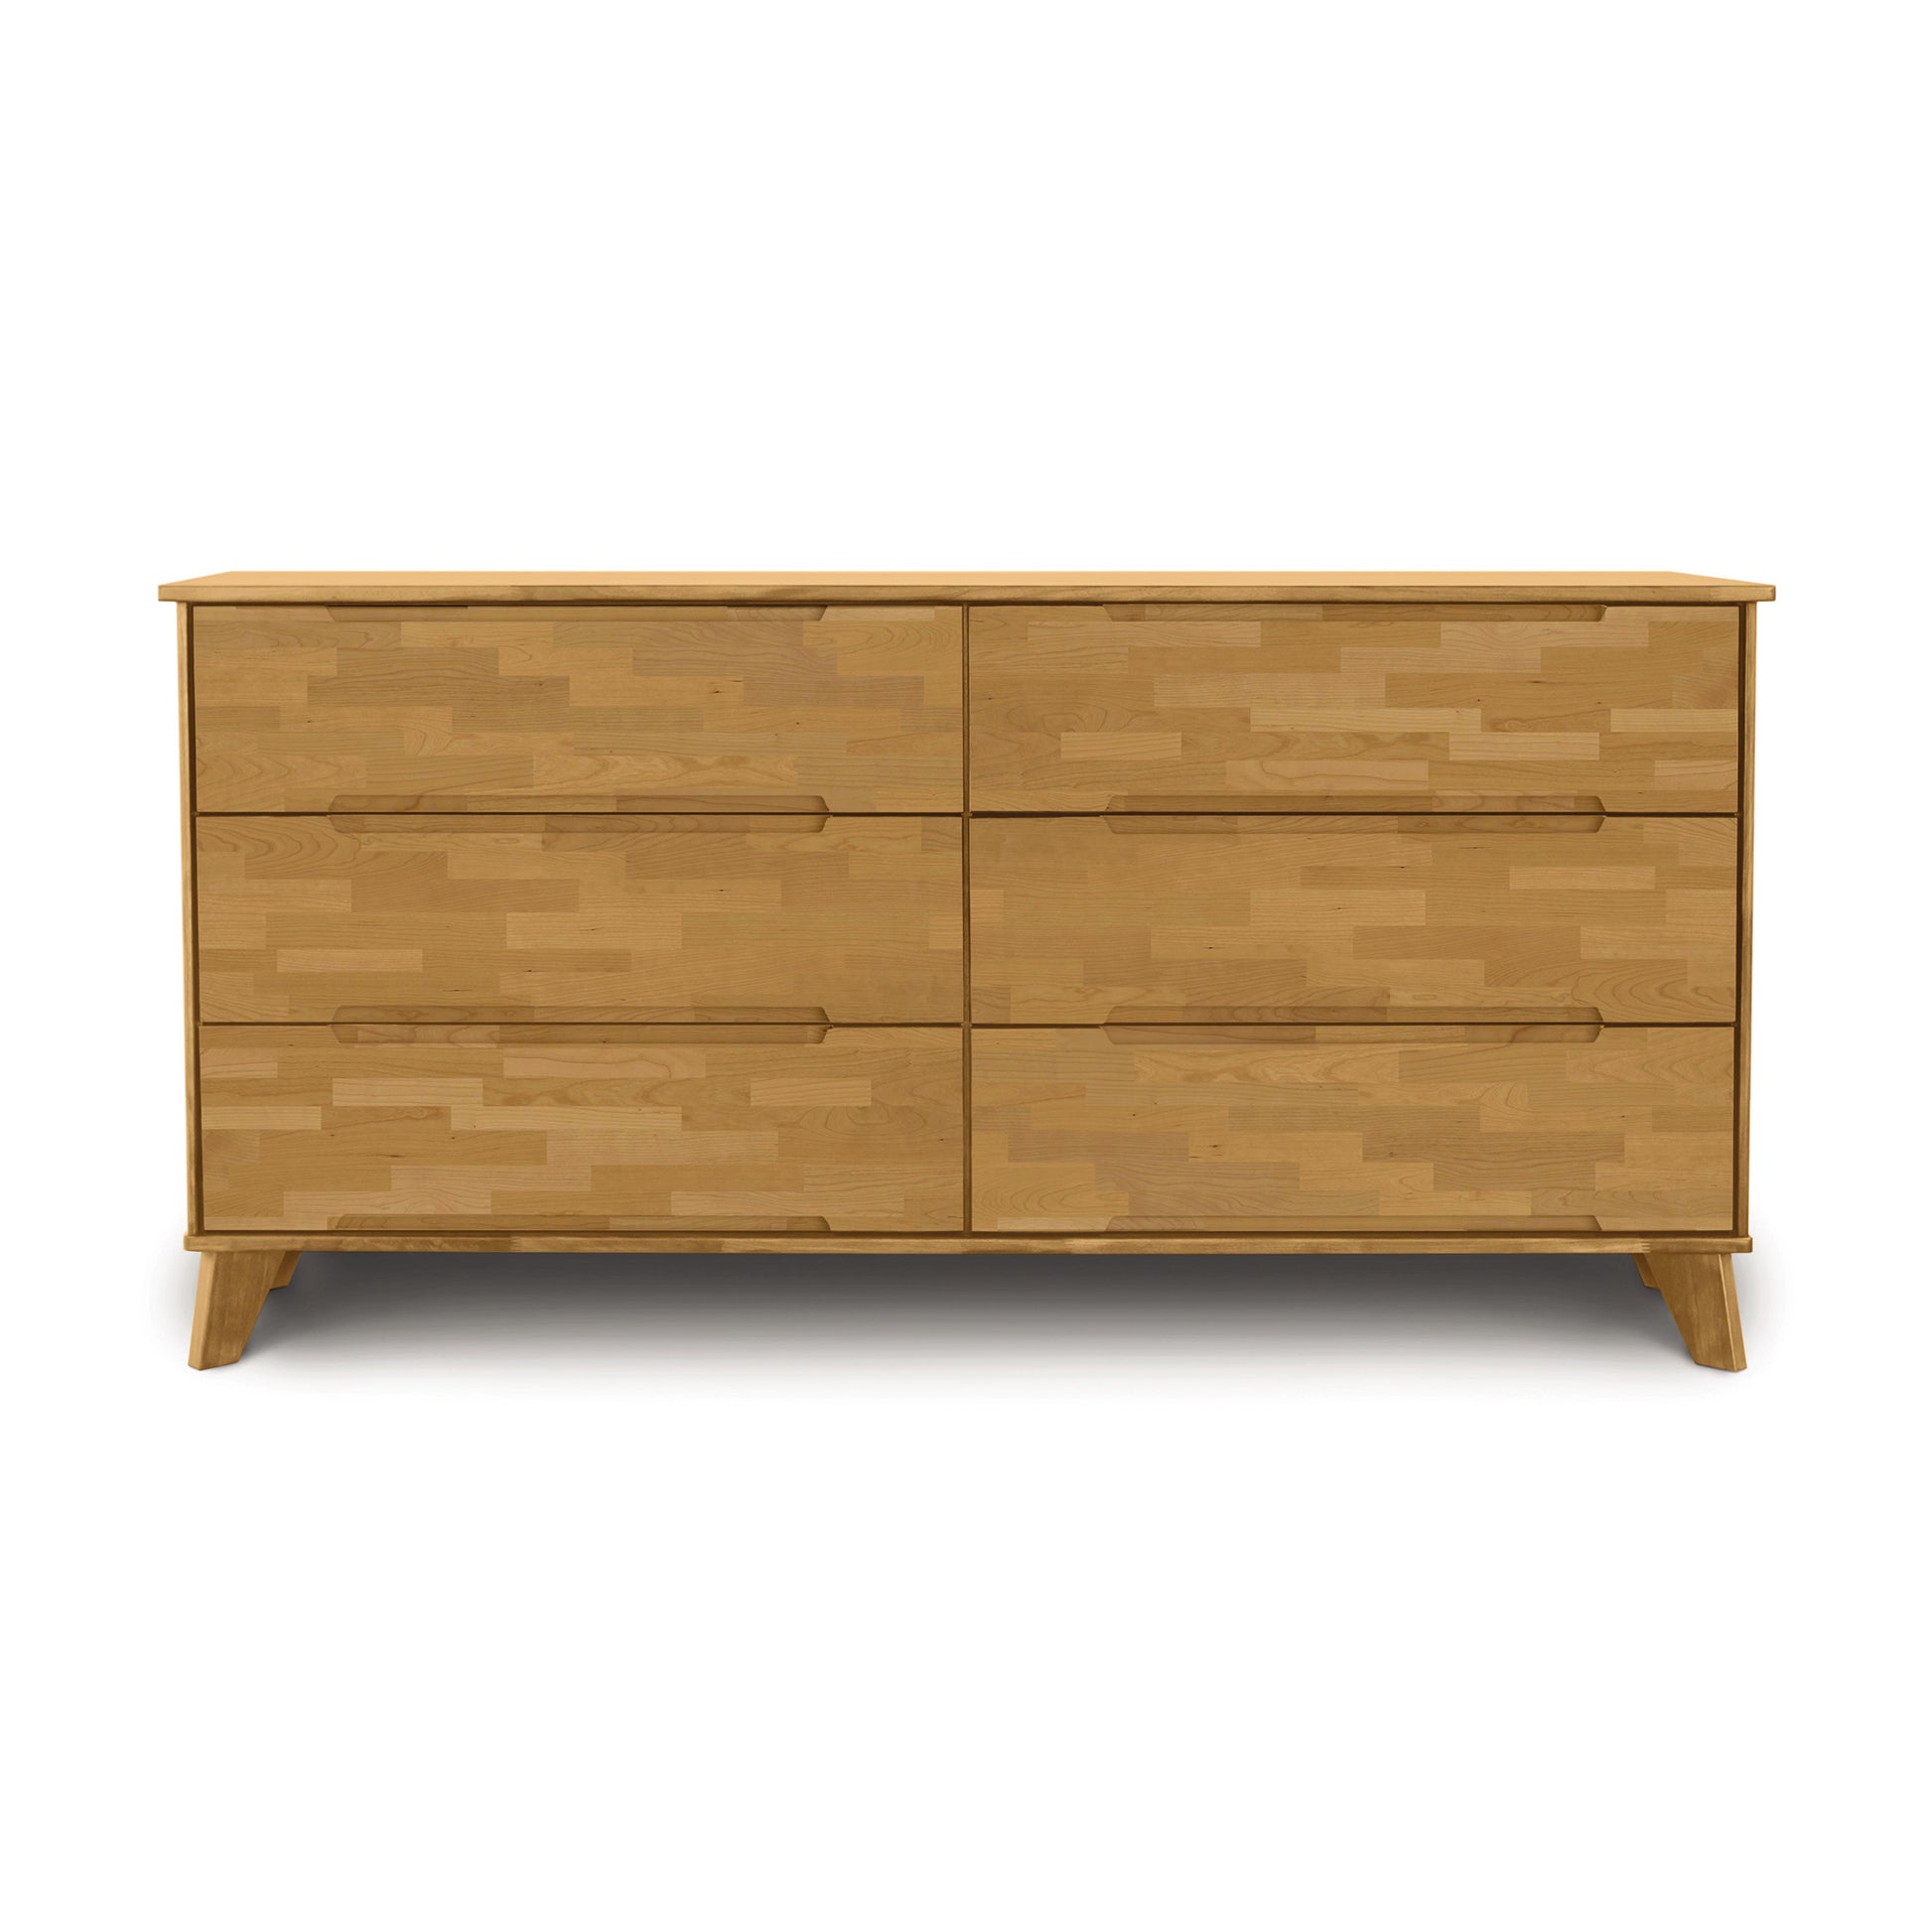 A mid-century modern Linn 6-Drawer Dresser by Copeland Furniture with drawers on a white background.